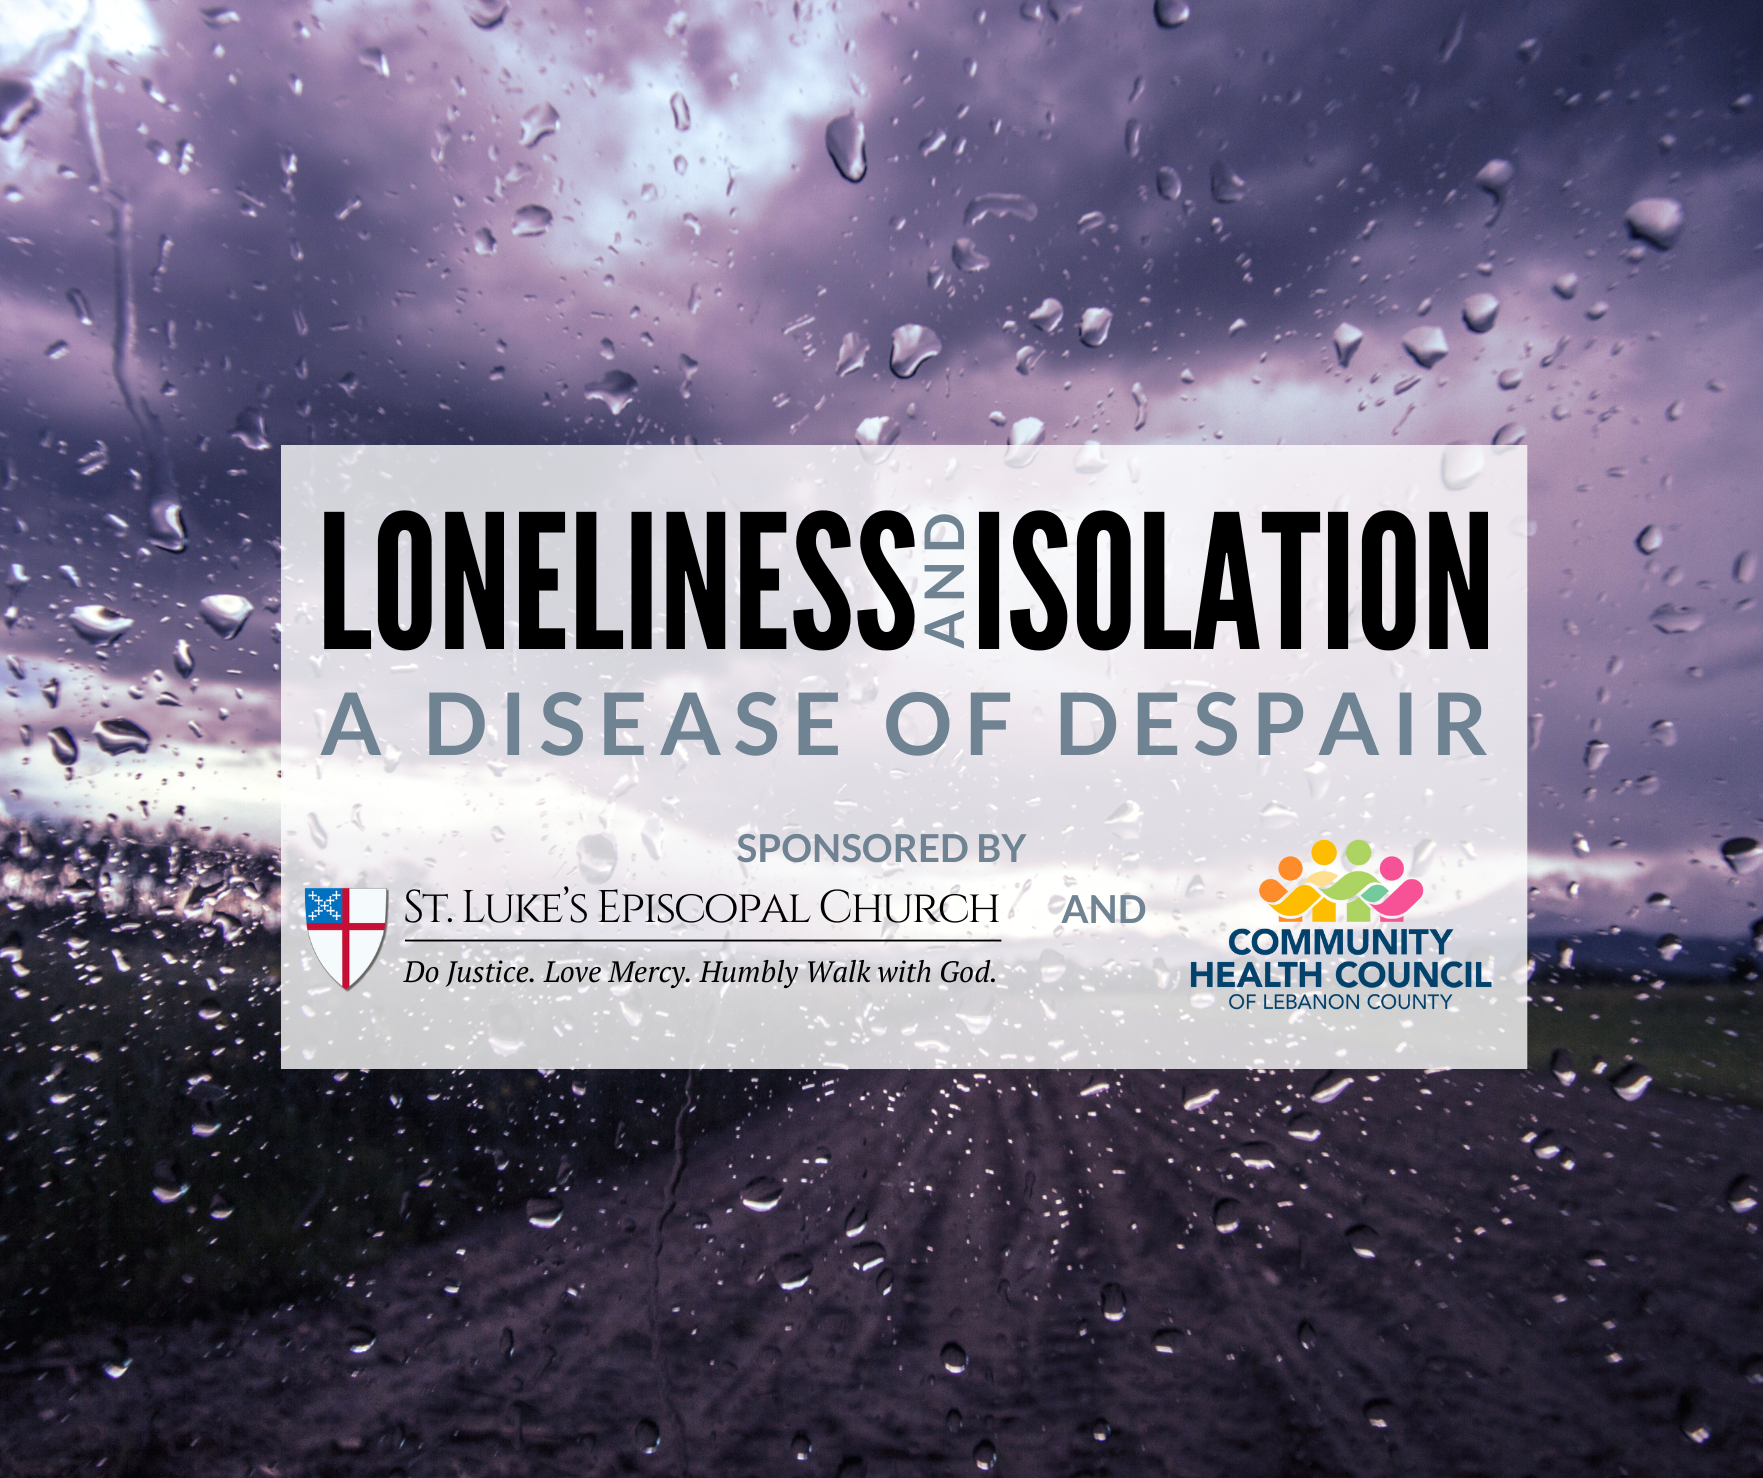 loneliness and isolation: a disease of despair